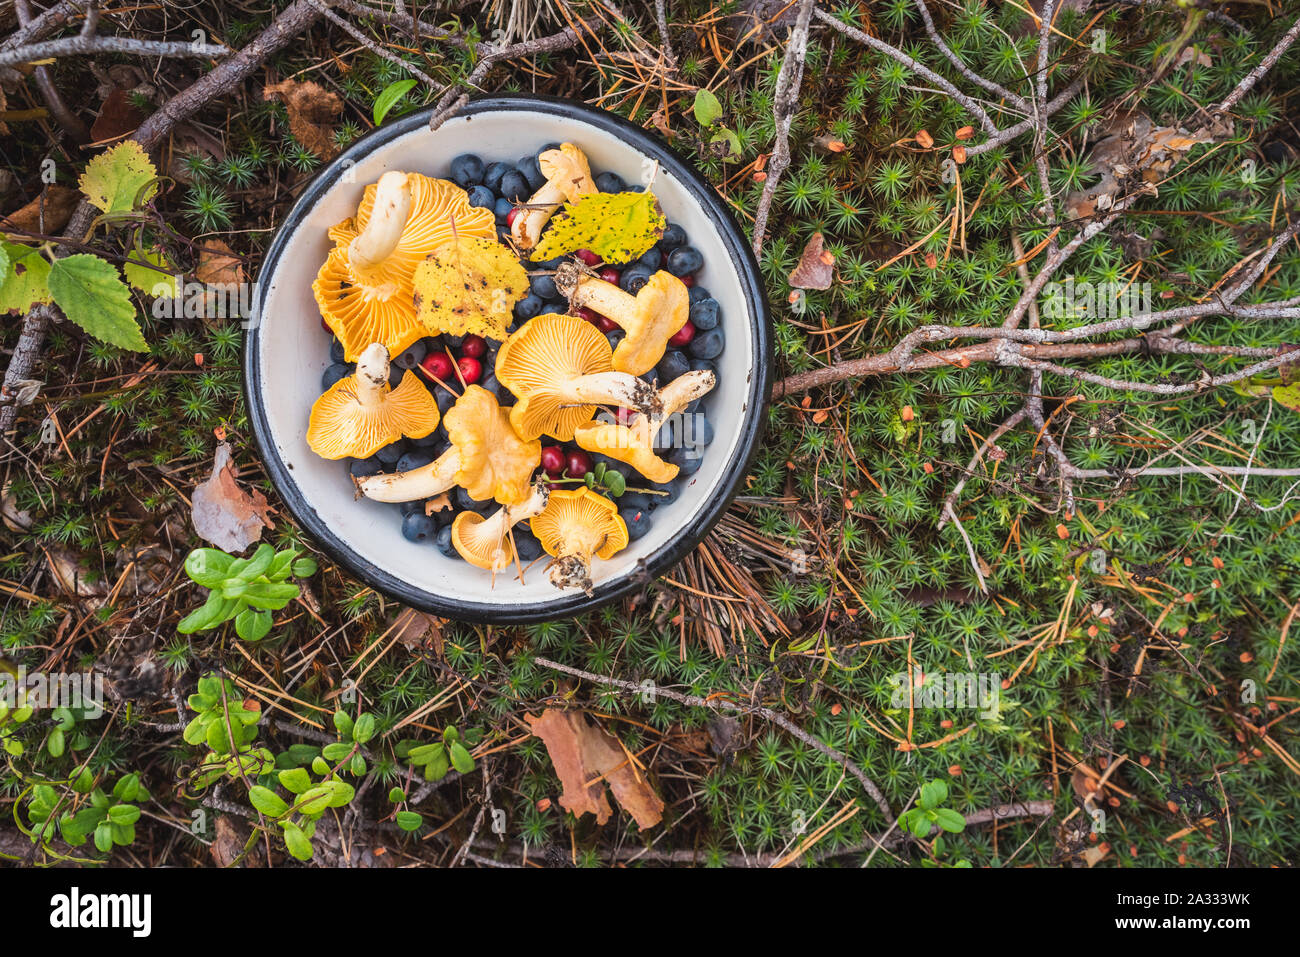 Chanterelles, wild bilberries (blueberries) and lingonberries in bowl on moss with fallen pine tree twigs & needles. Wild berries & mushroom foraging Stock Photo